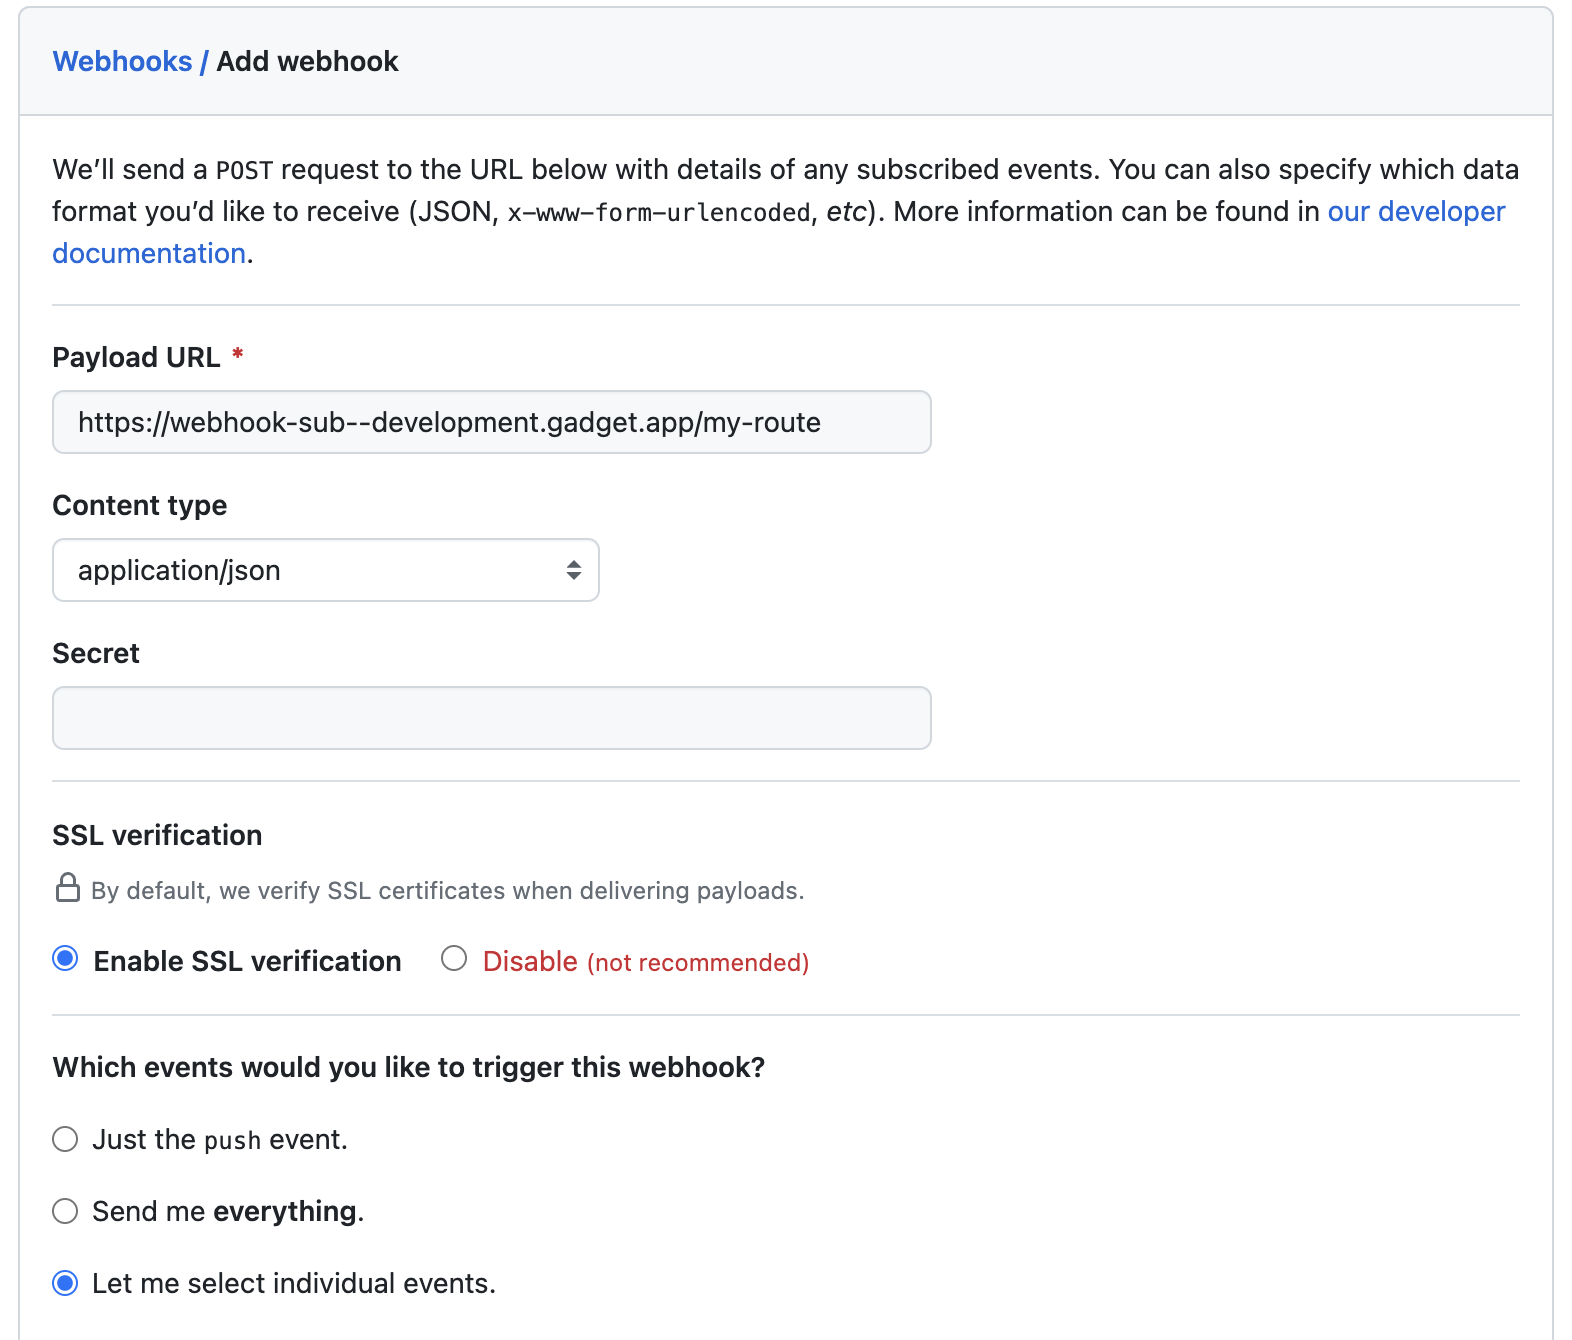 Screenshot of the webhook configuration page in GitHub, with a Payload URL entered, the 'Content type' set to 'application/json', and the 'Let me select individual events.' option selected.